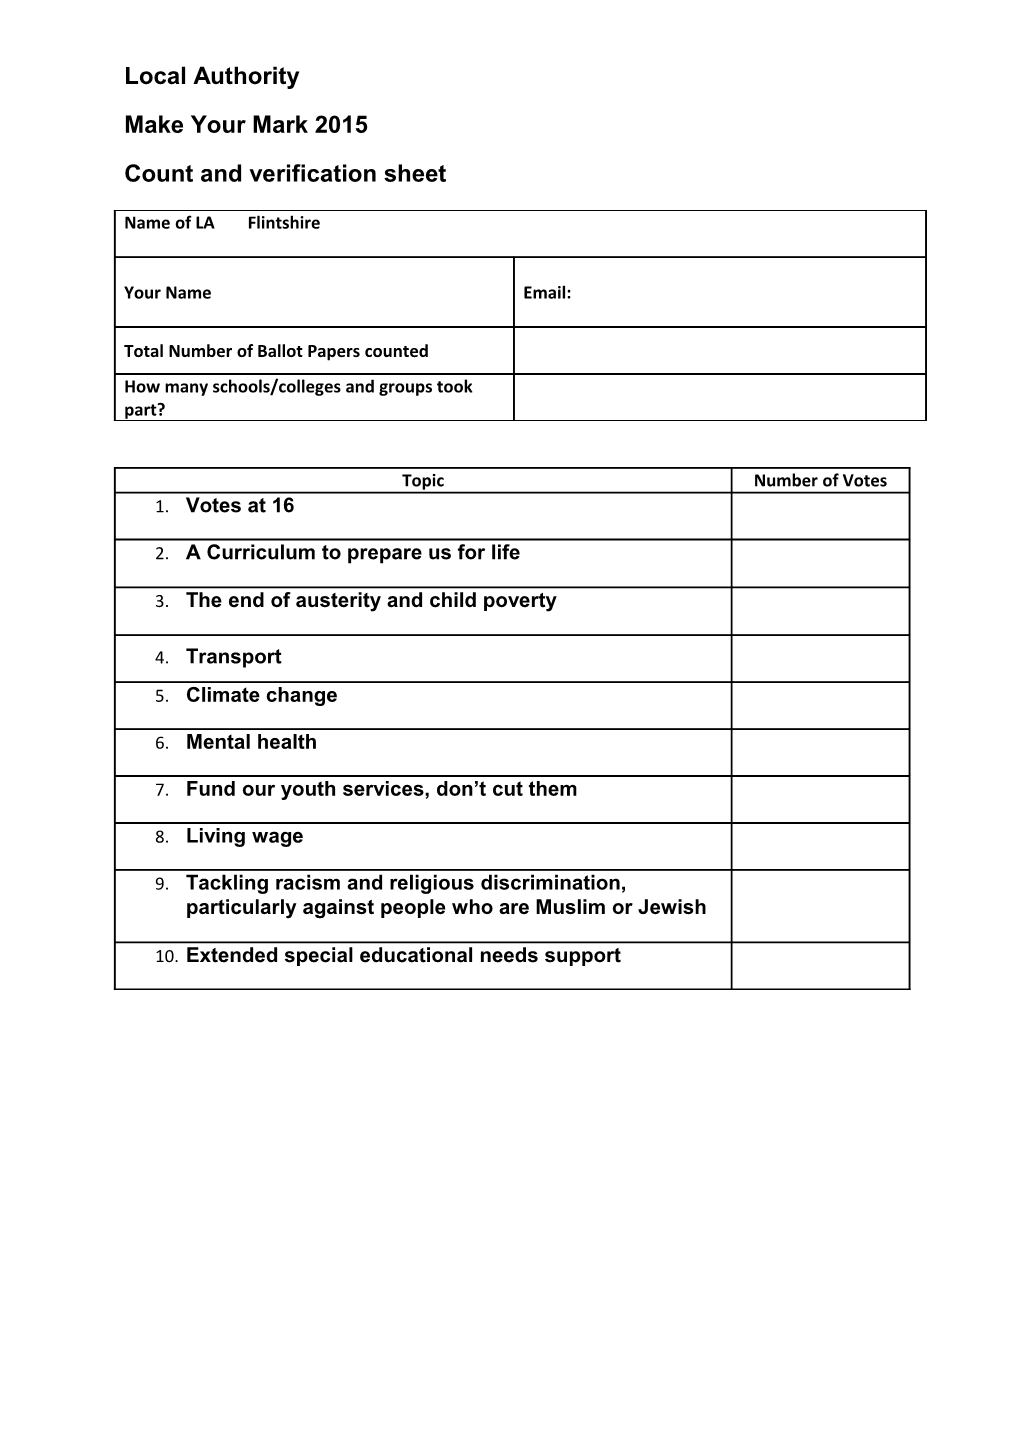 Count and Verification Sheet s10